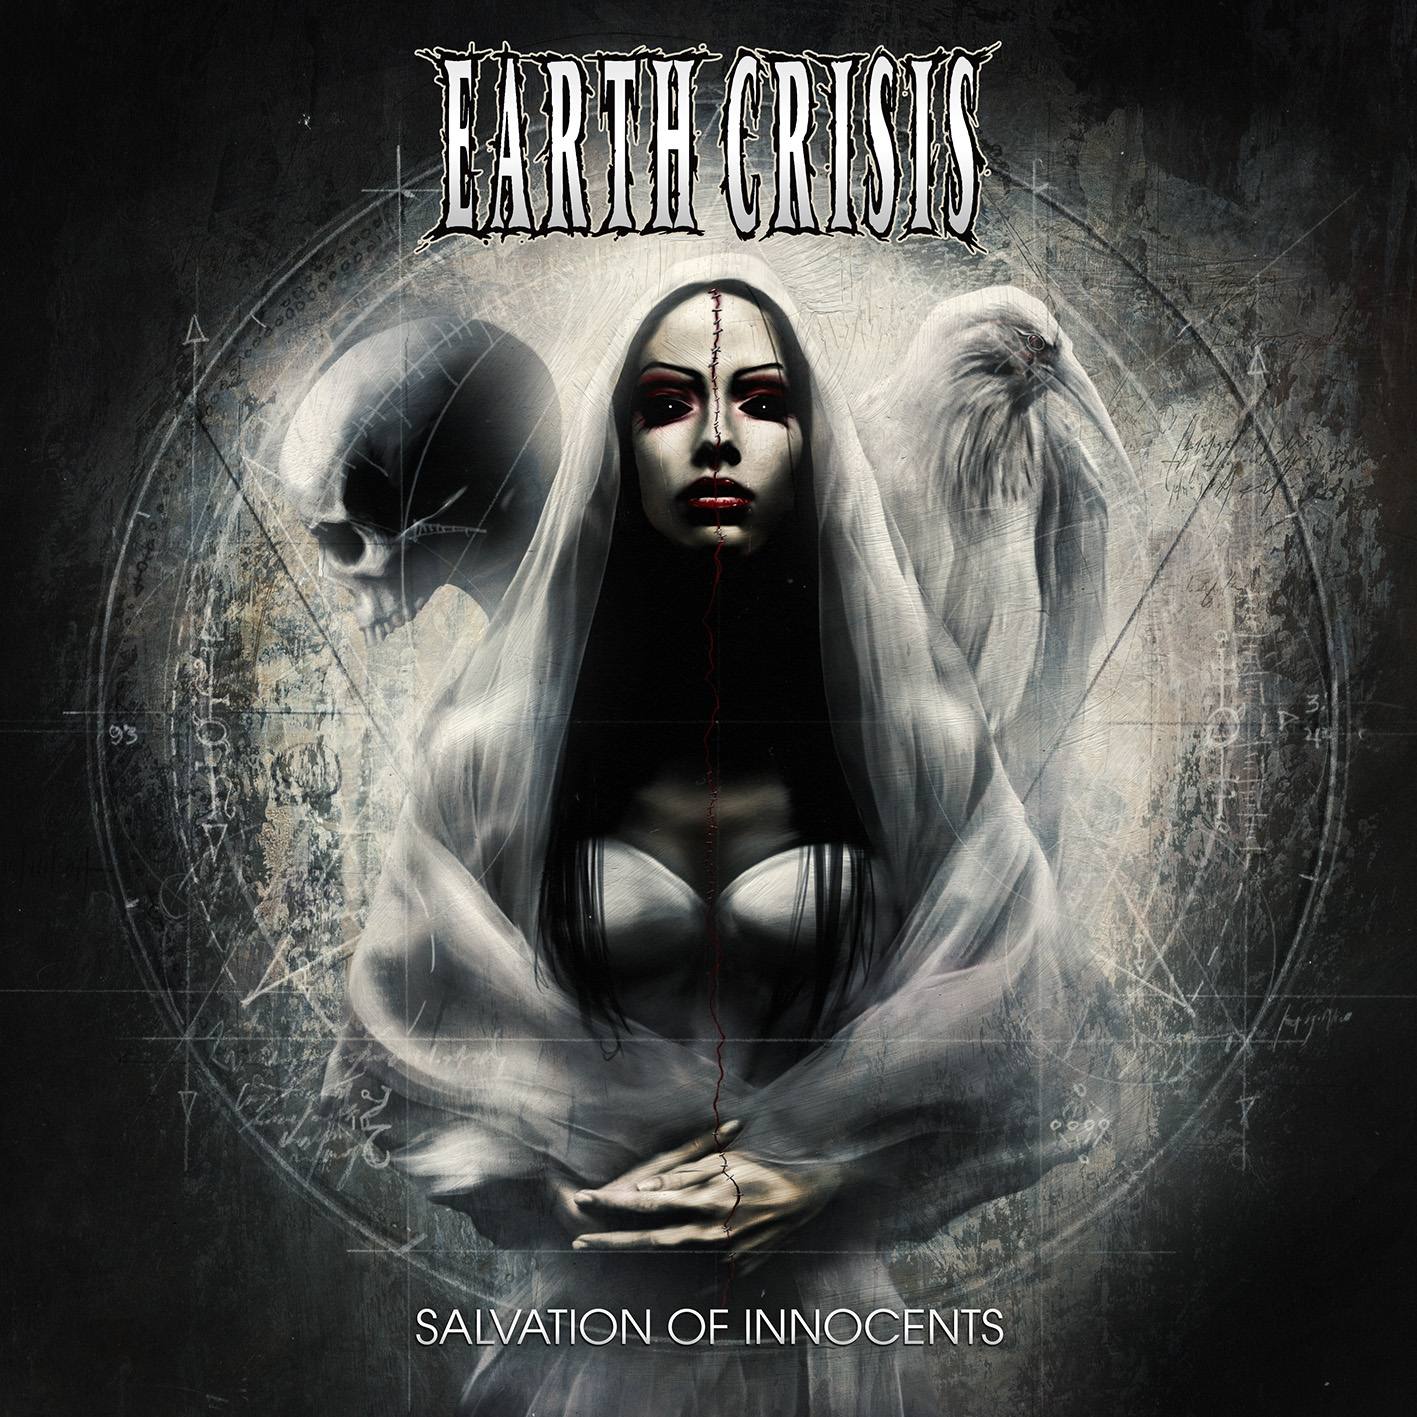 News Added Jan 28, 2014 Earth Crisis is an American metalcore band from Syracuse, New York, active from 1989 until 2001, reuniting in 2007. Their most recent record, Neutralize the Threat, was released in July 12, 2011 through Century Media Submitted By khaos337